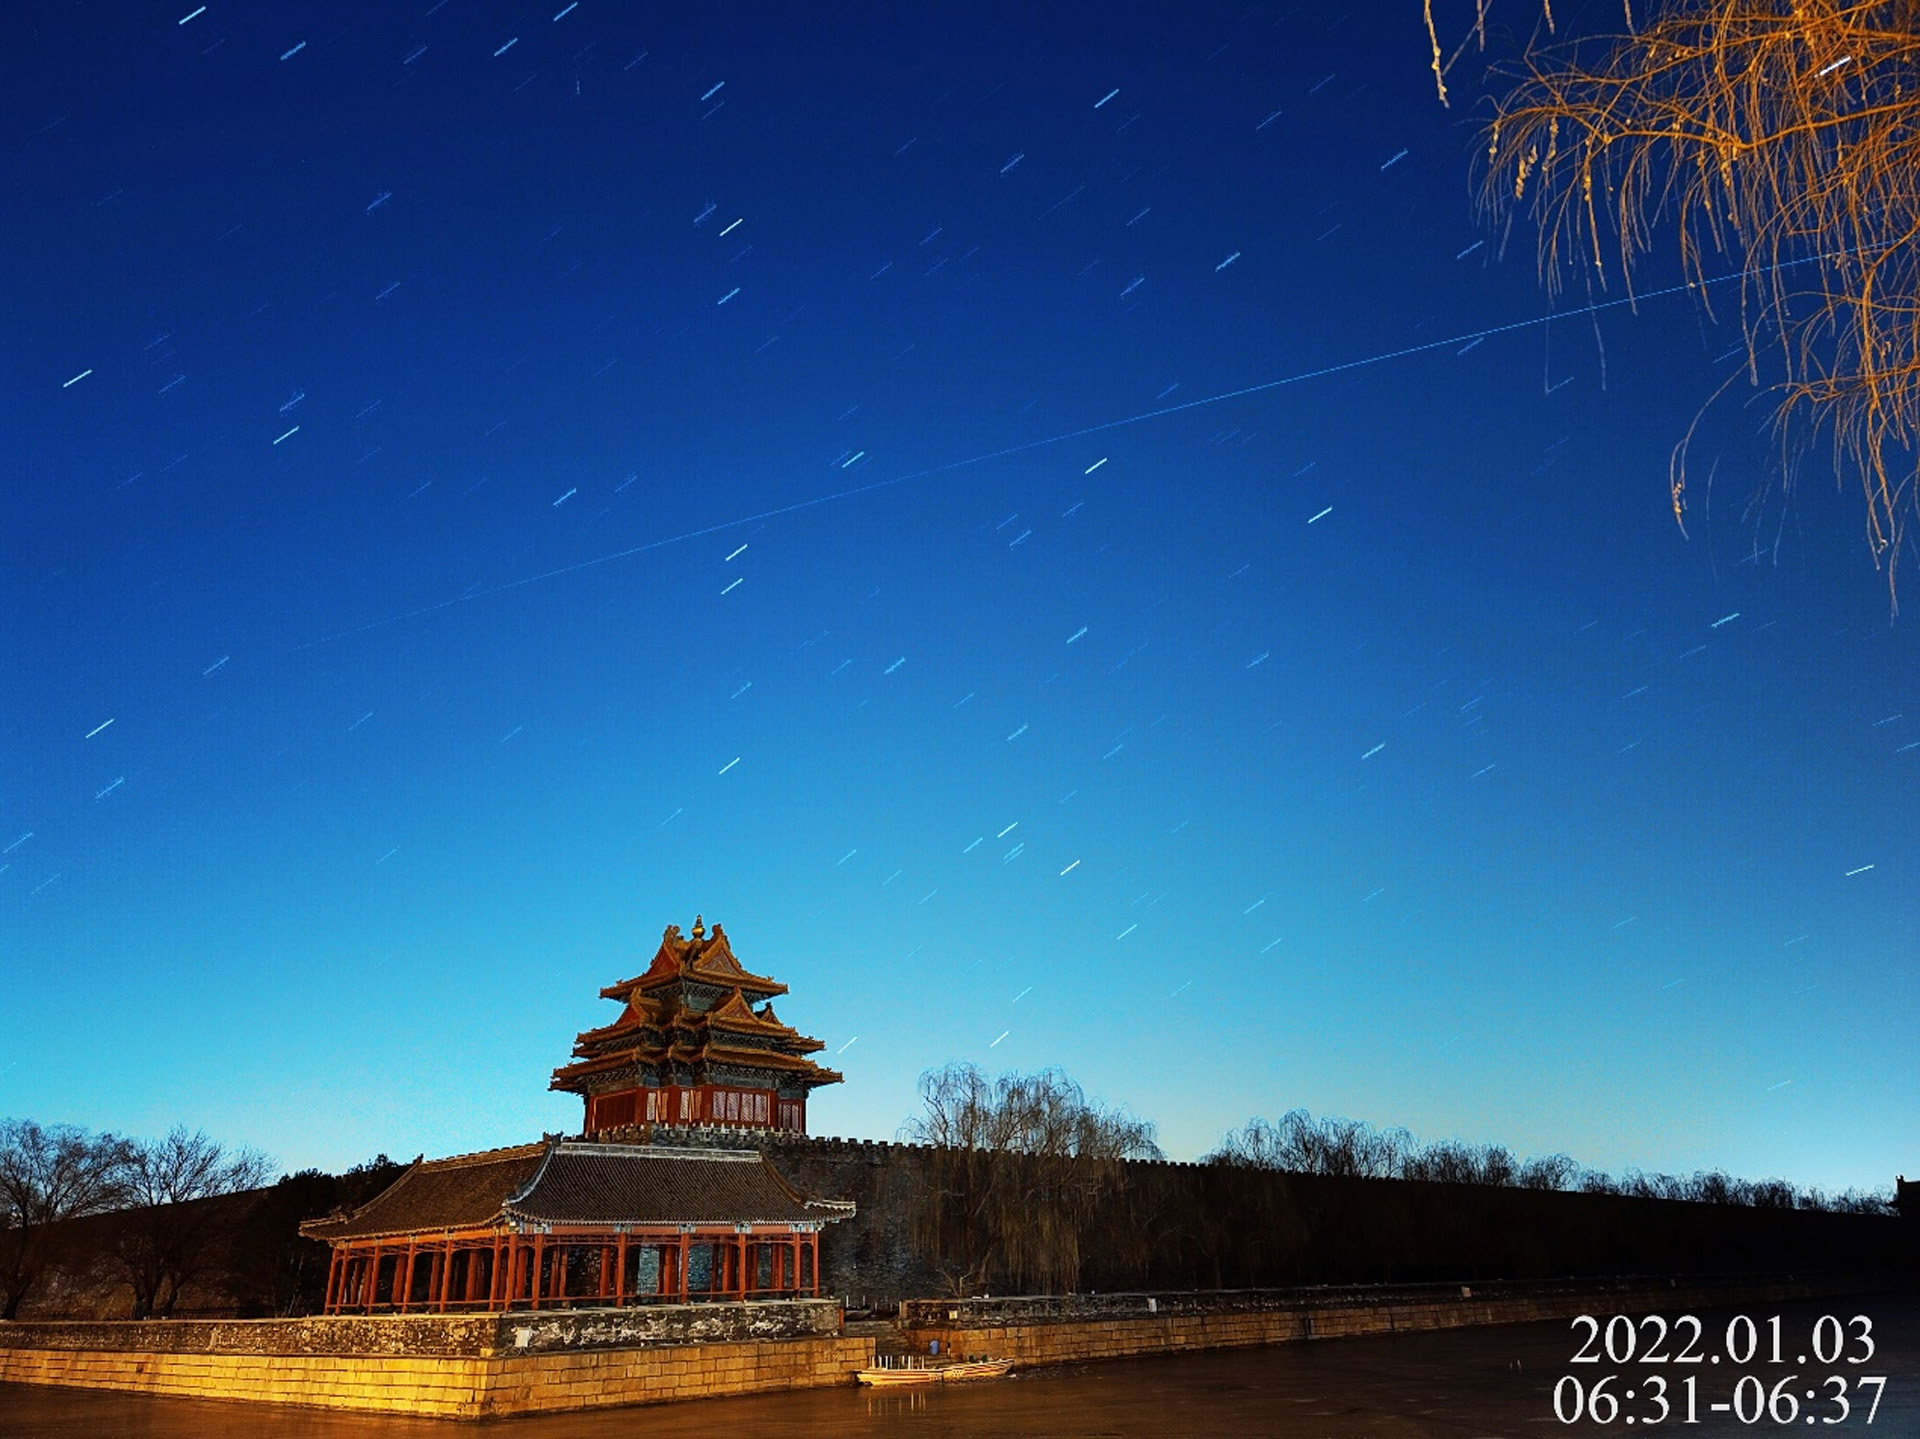 China's space station flies across the sky above the Forbidden City in Beijing, January 3, 2022. /Li Yonggang